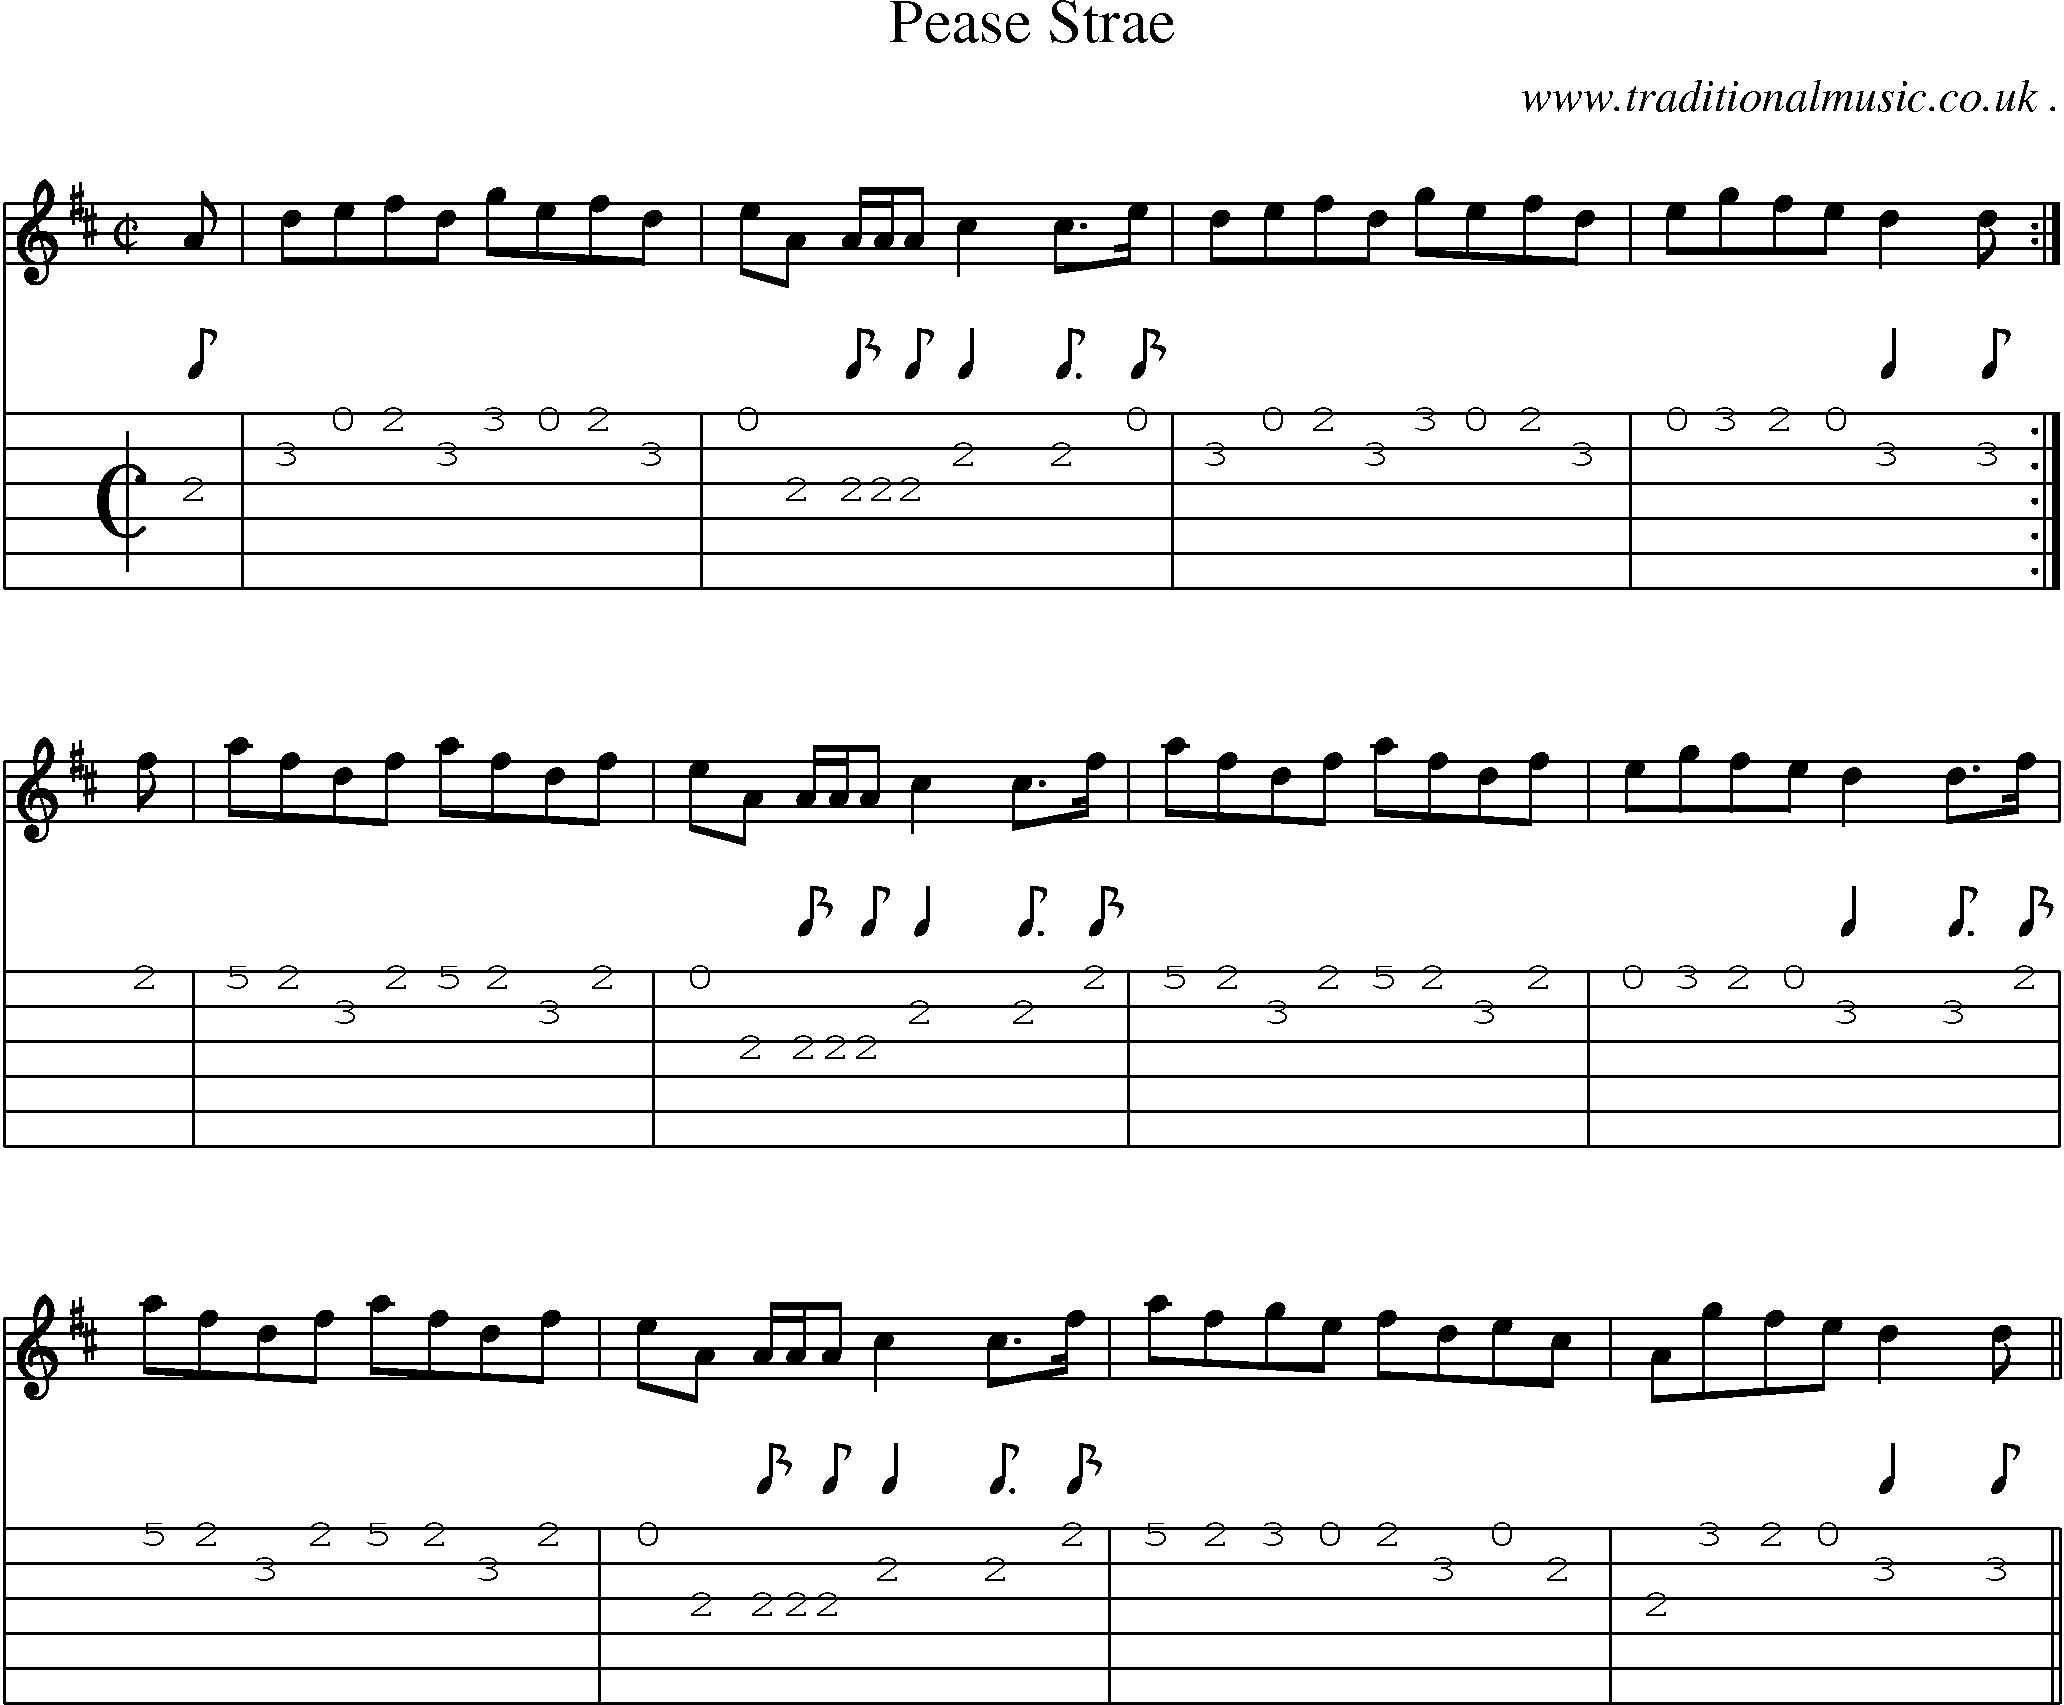 Sheet-music  score, Chords and Guitar Tabs for Pease Strae